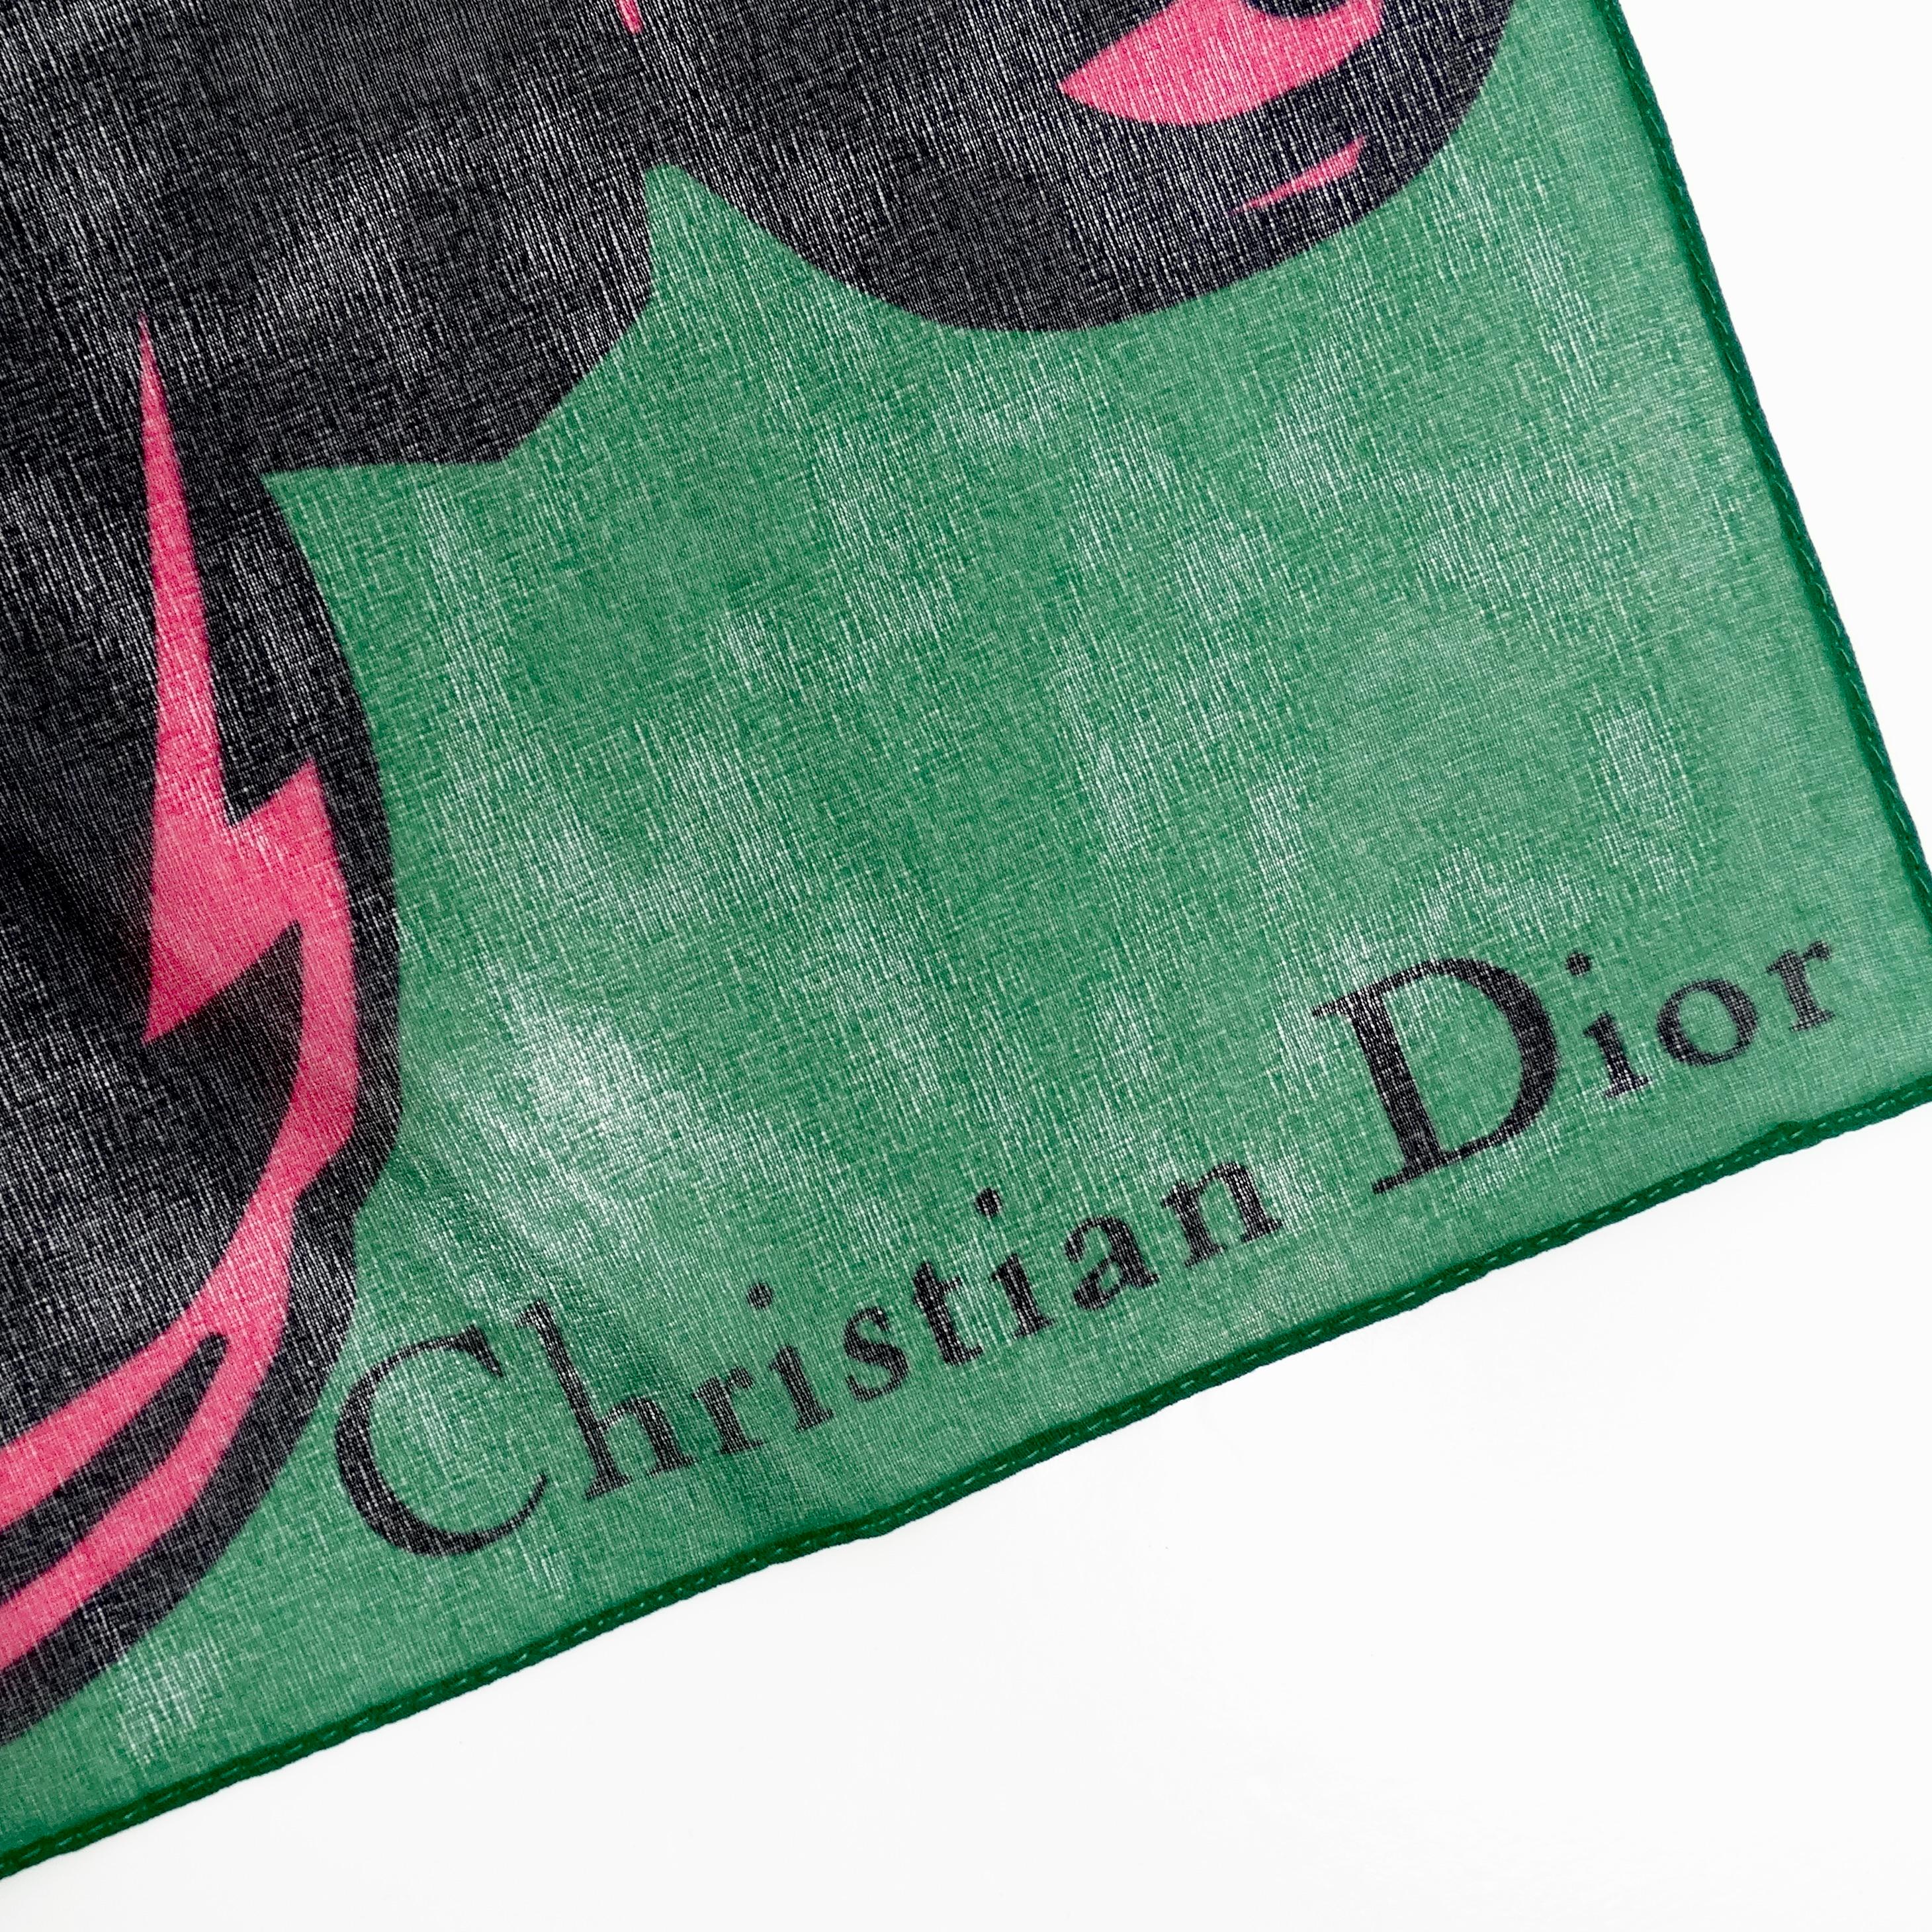 The Christian Dior 1990s Poison Petite Silk Scarf is a stunning accessory that exudes elegance and sophistication. Crafted from luxurious silk, this petite necktie or pocket square is designed to elevate your look with its unique print and timeless